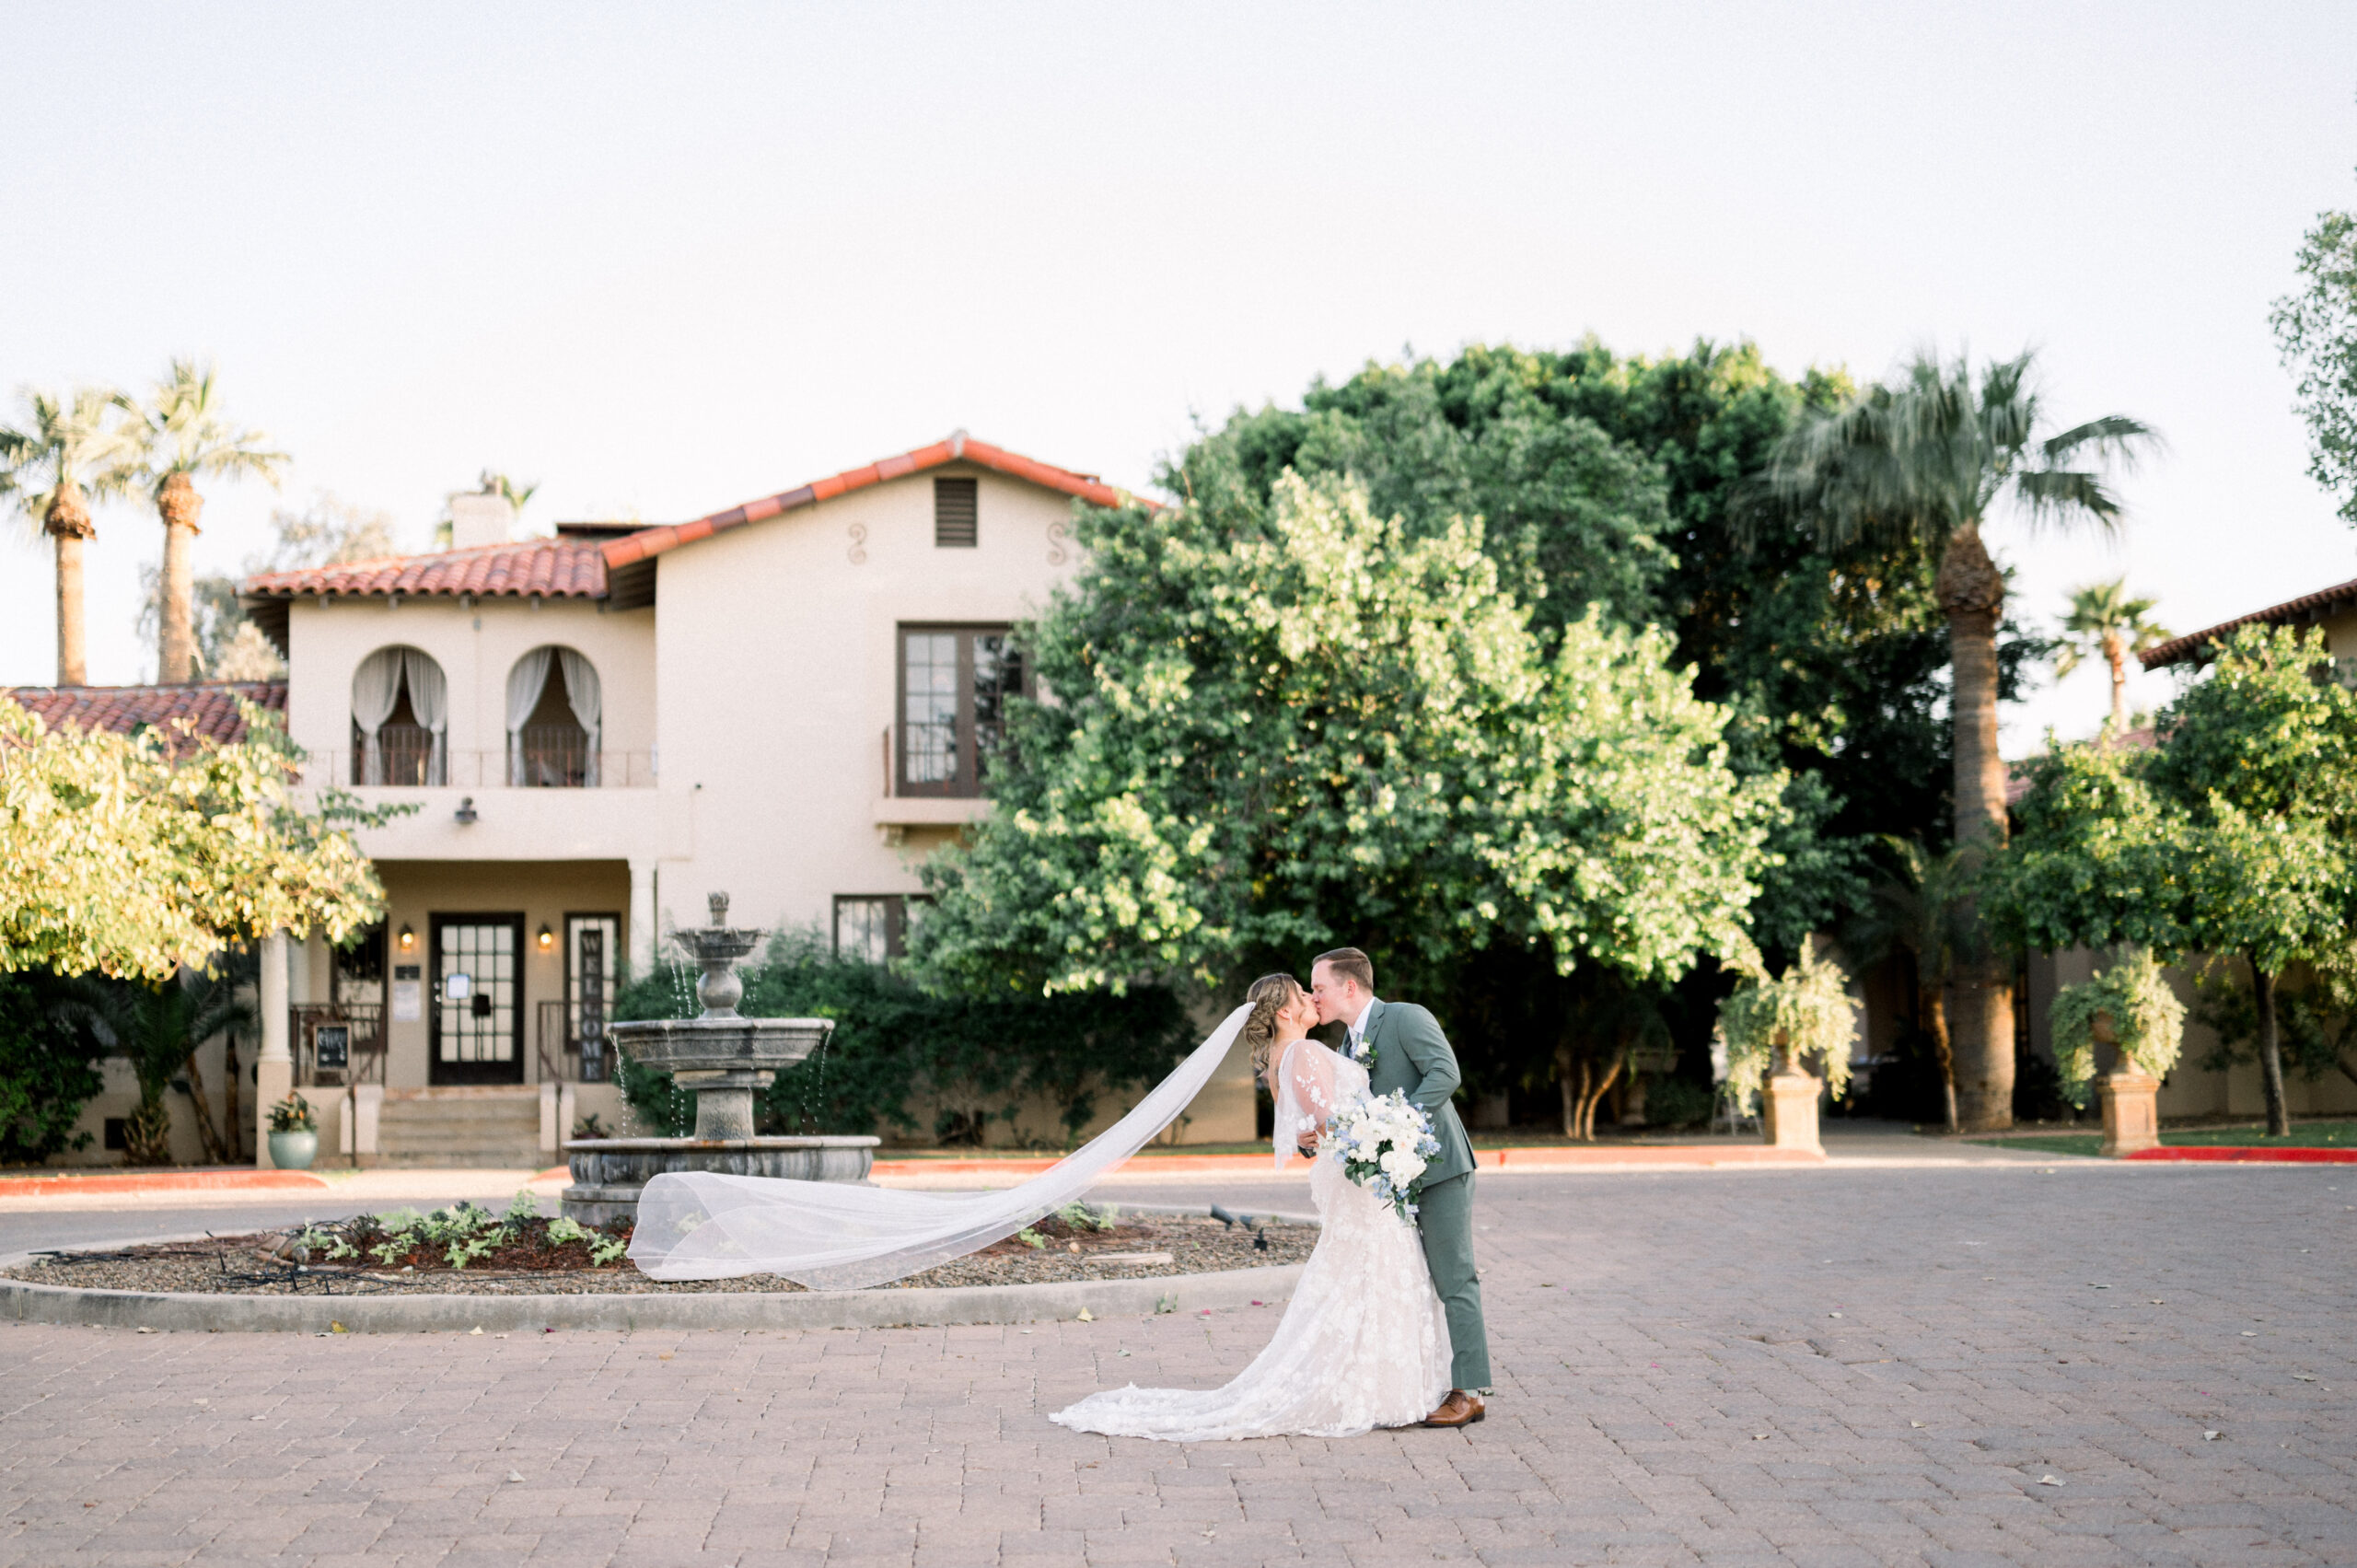 Kayla and Cades love story is a beautiful one. Which made for their blue + green garden wedding at the Secret Garden even most amazing!